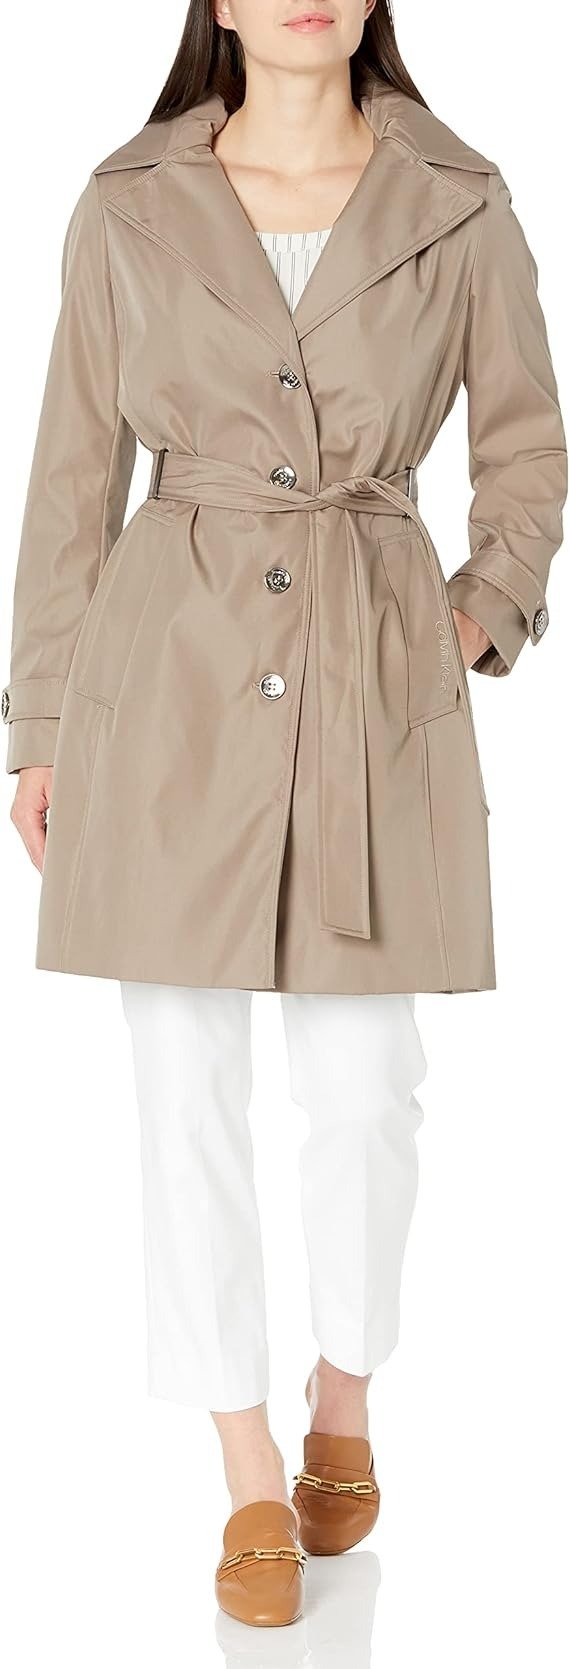 Women's Single Breasted Belted Rain Jacket with Removable Hood